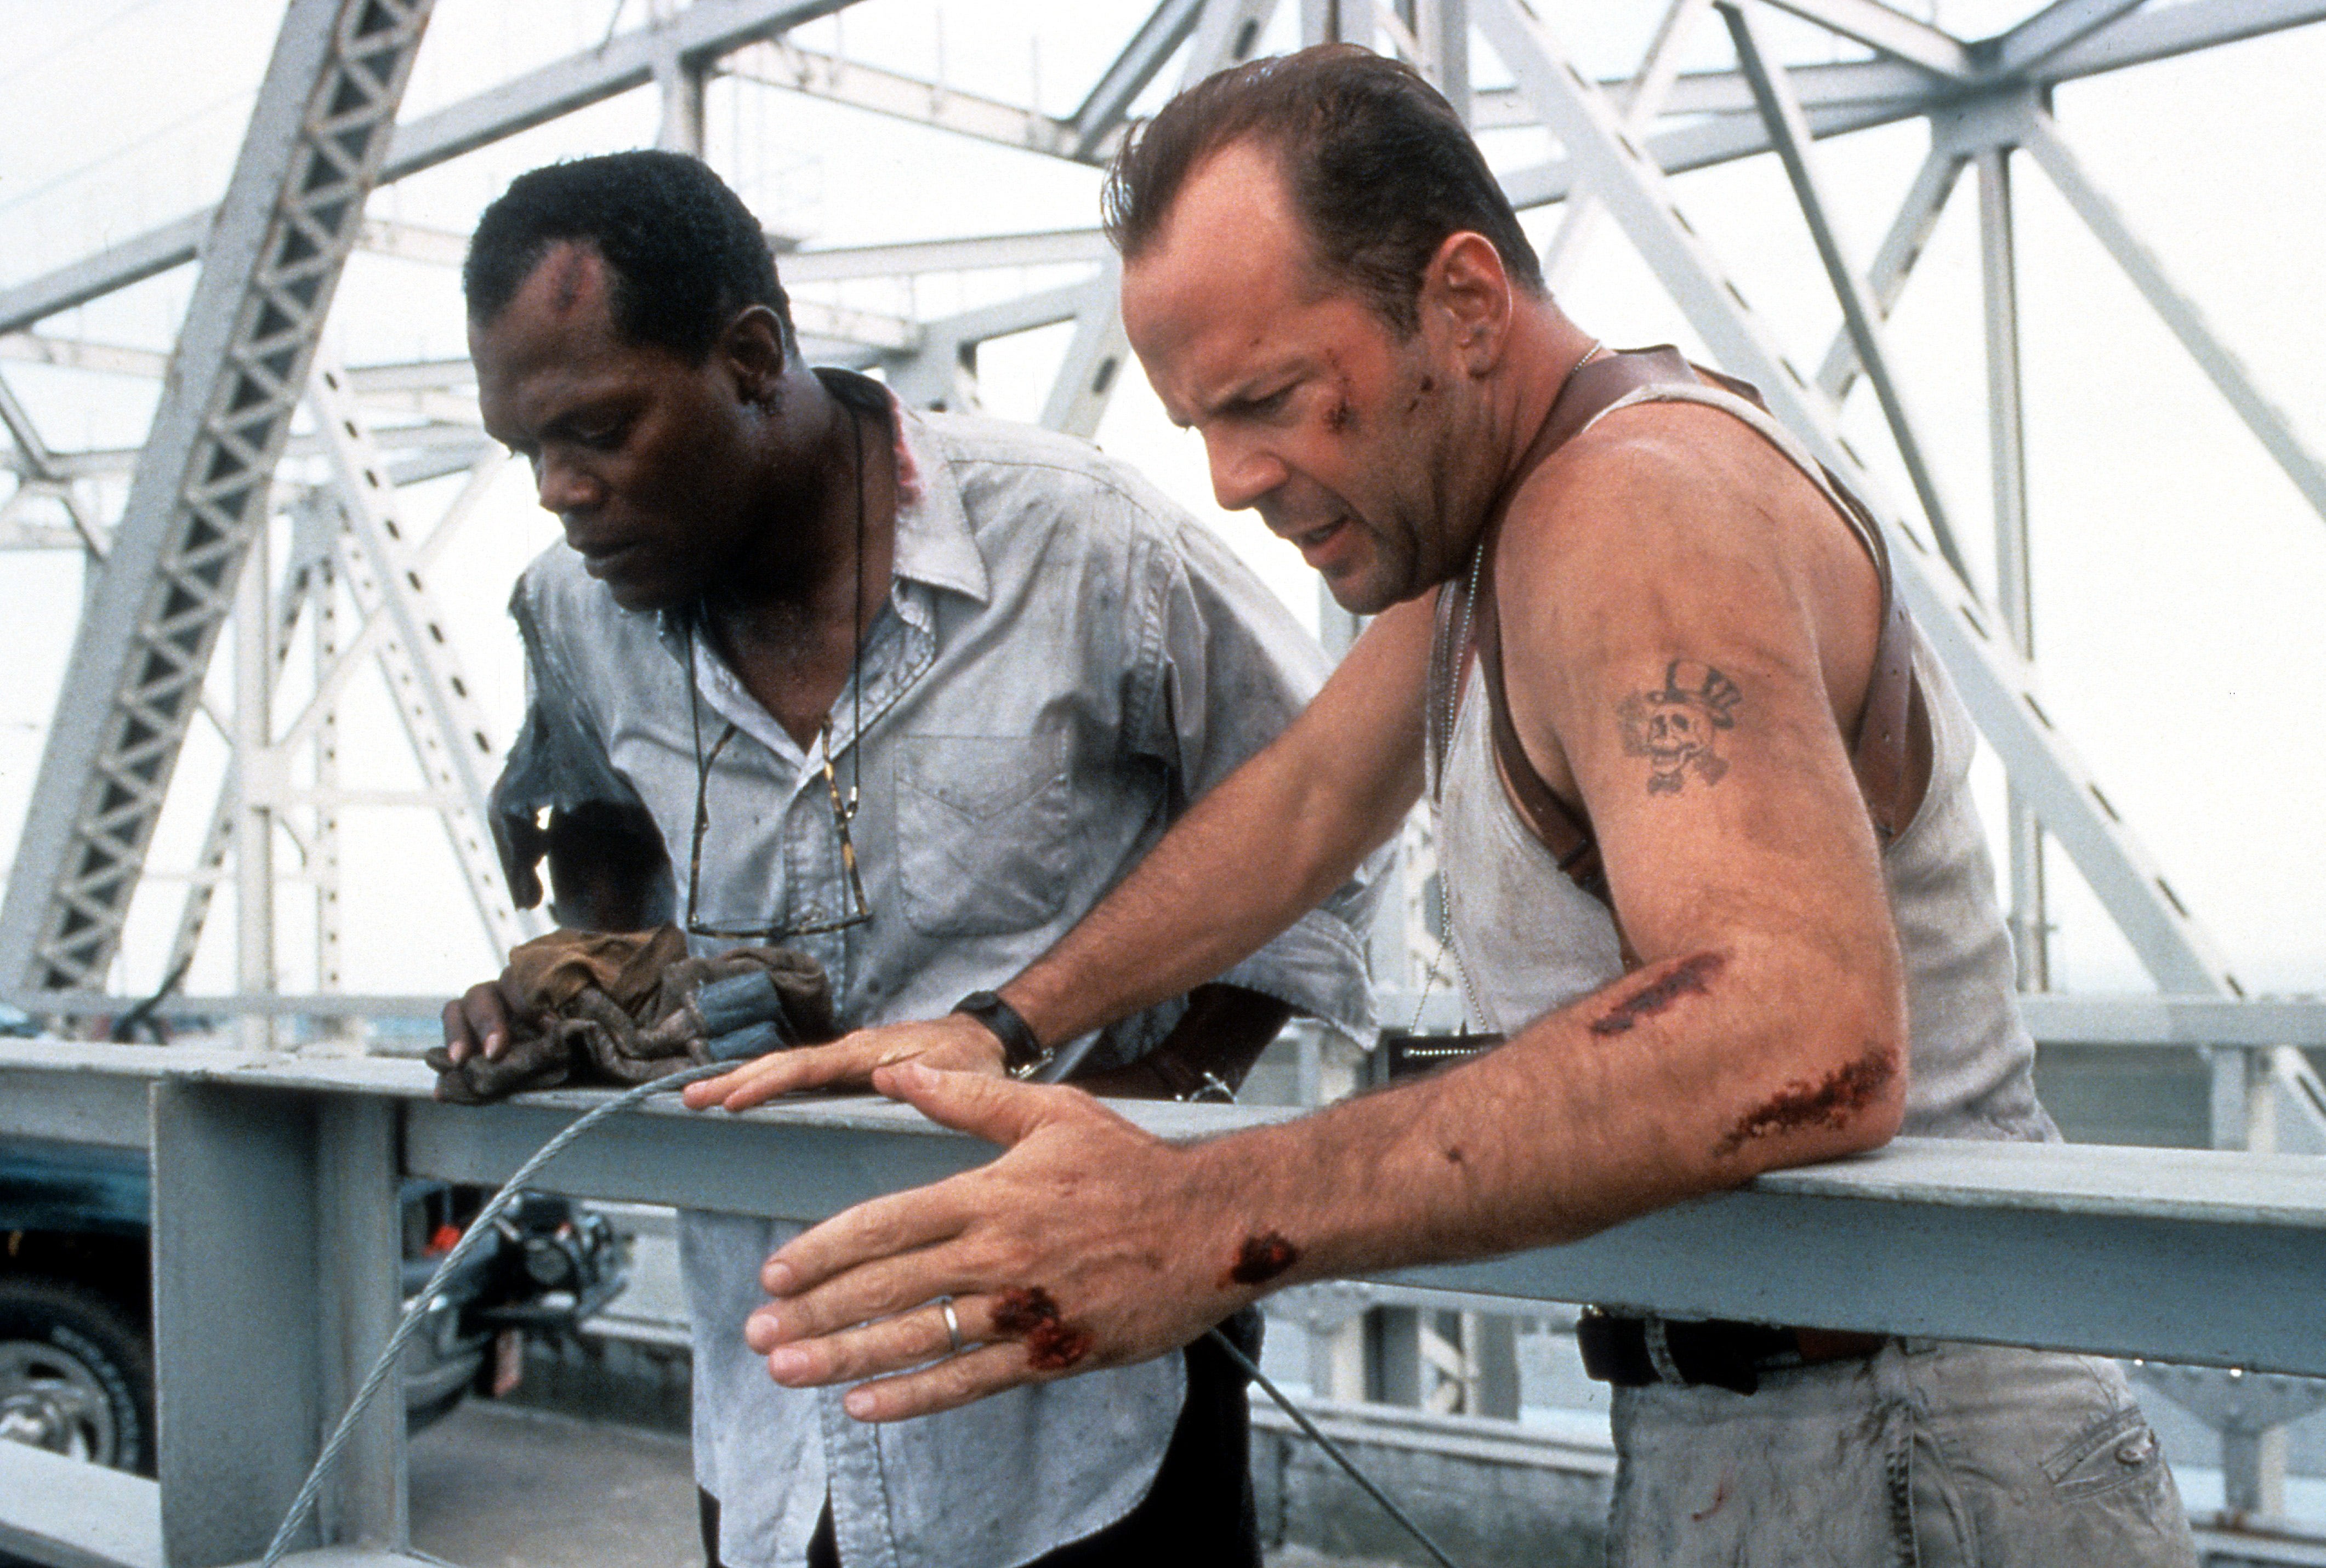 Samuel L Jackson and Bruce Willis standing on a bridge, looking down in a scene from the film Die Hard: With a Vengeance